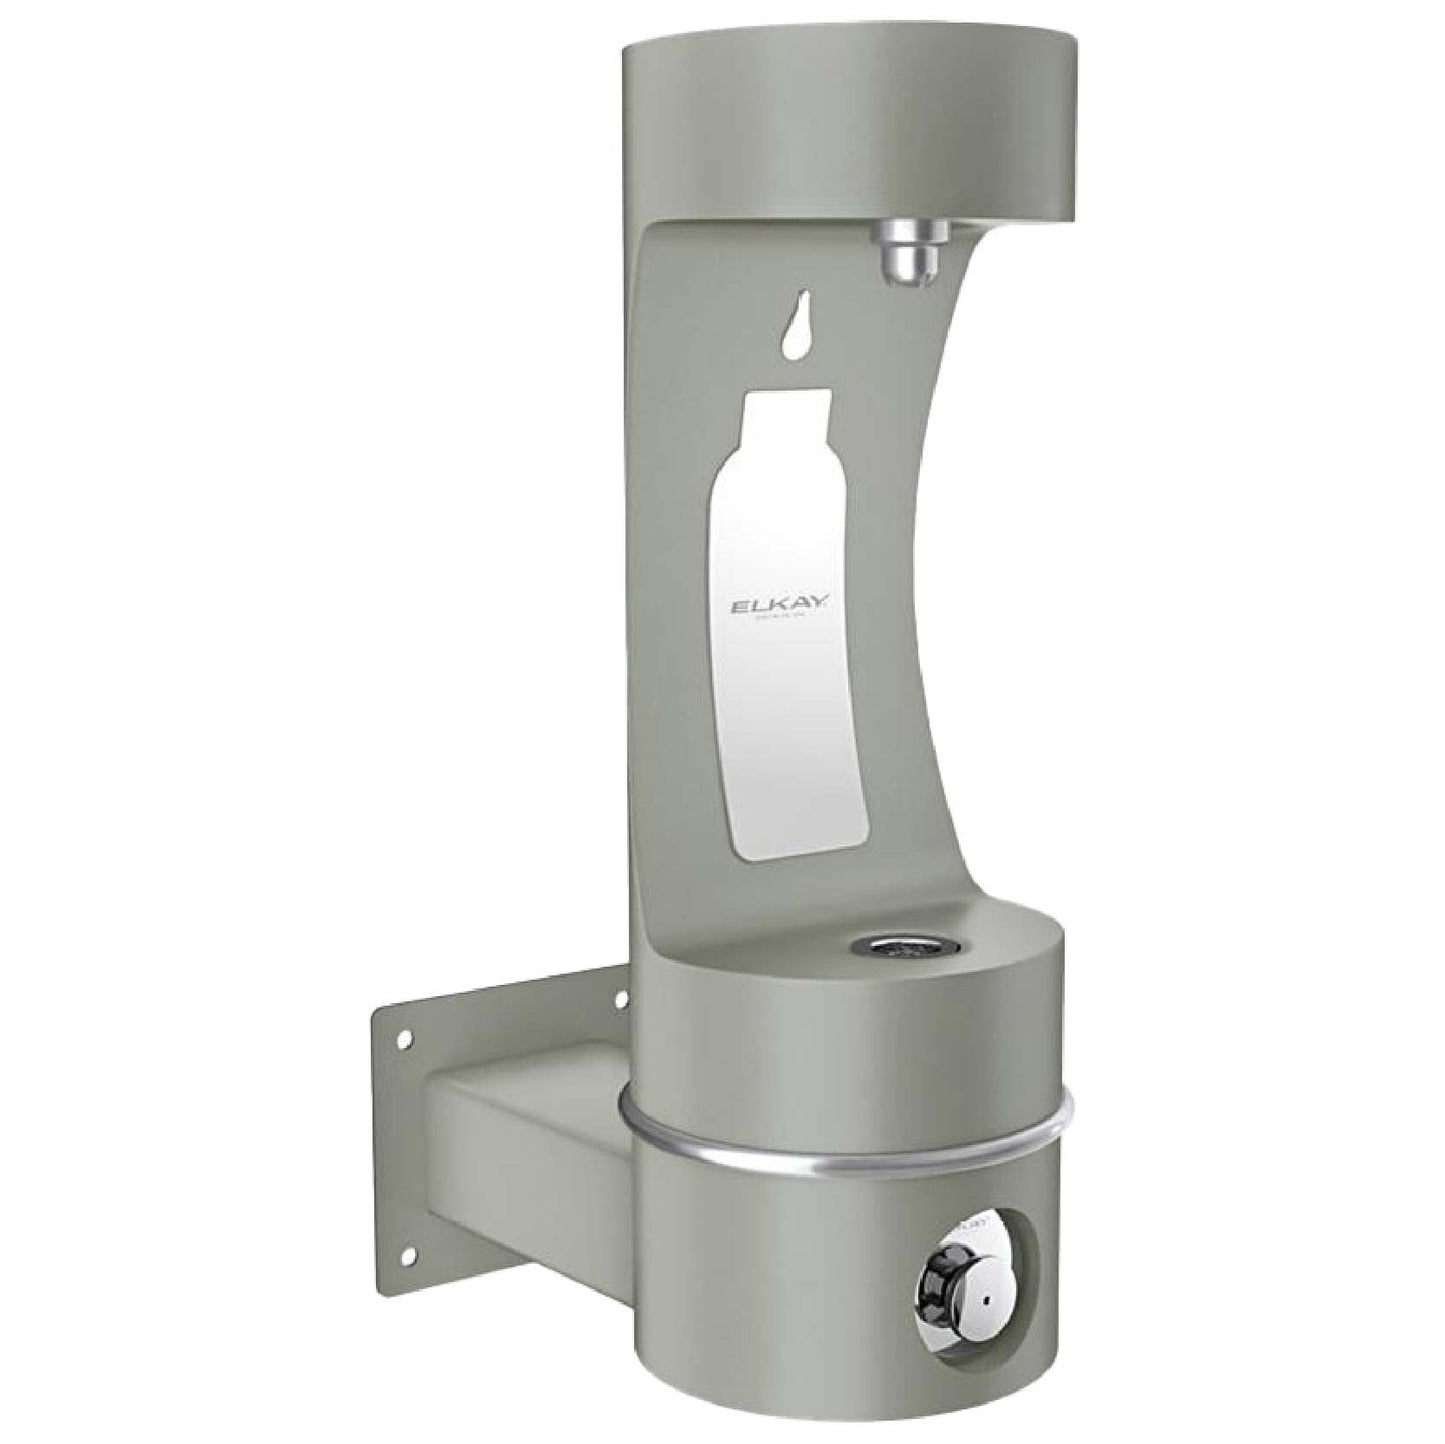 Elkay Outdoor ezH2O Single Arm Bottle Filling Station LK4405BF - Wall Mount Non-Filtered Non-Refrigerated